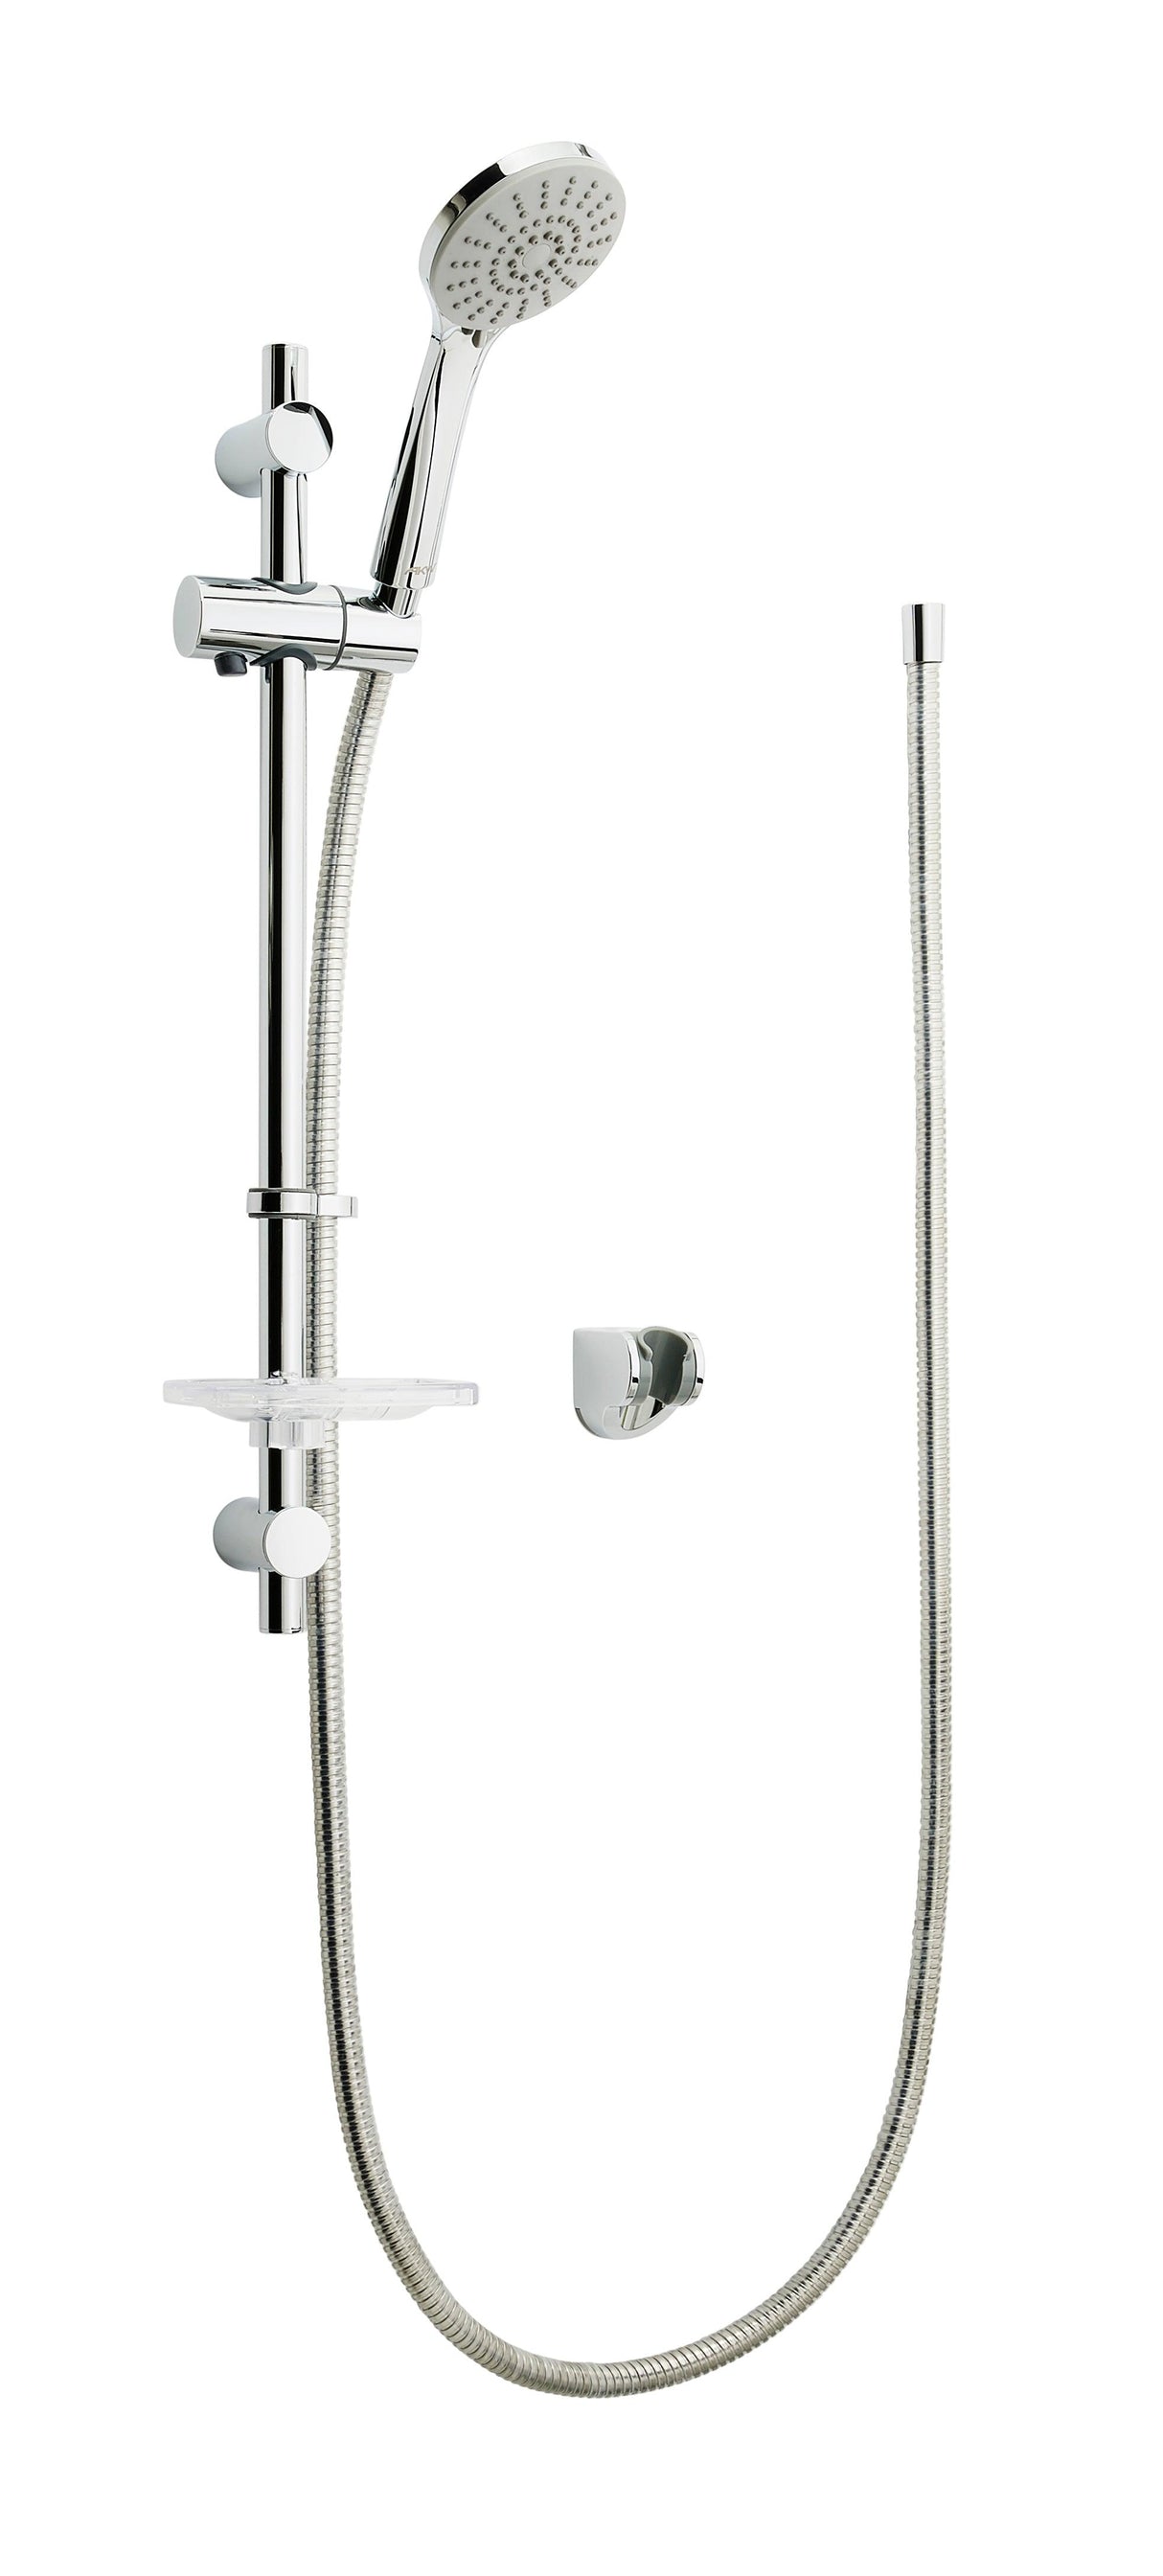 AKW Standard Shower Kit With Rail and 1.5m hose - Adaptation Supplies